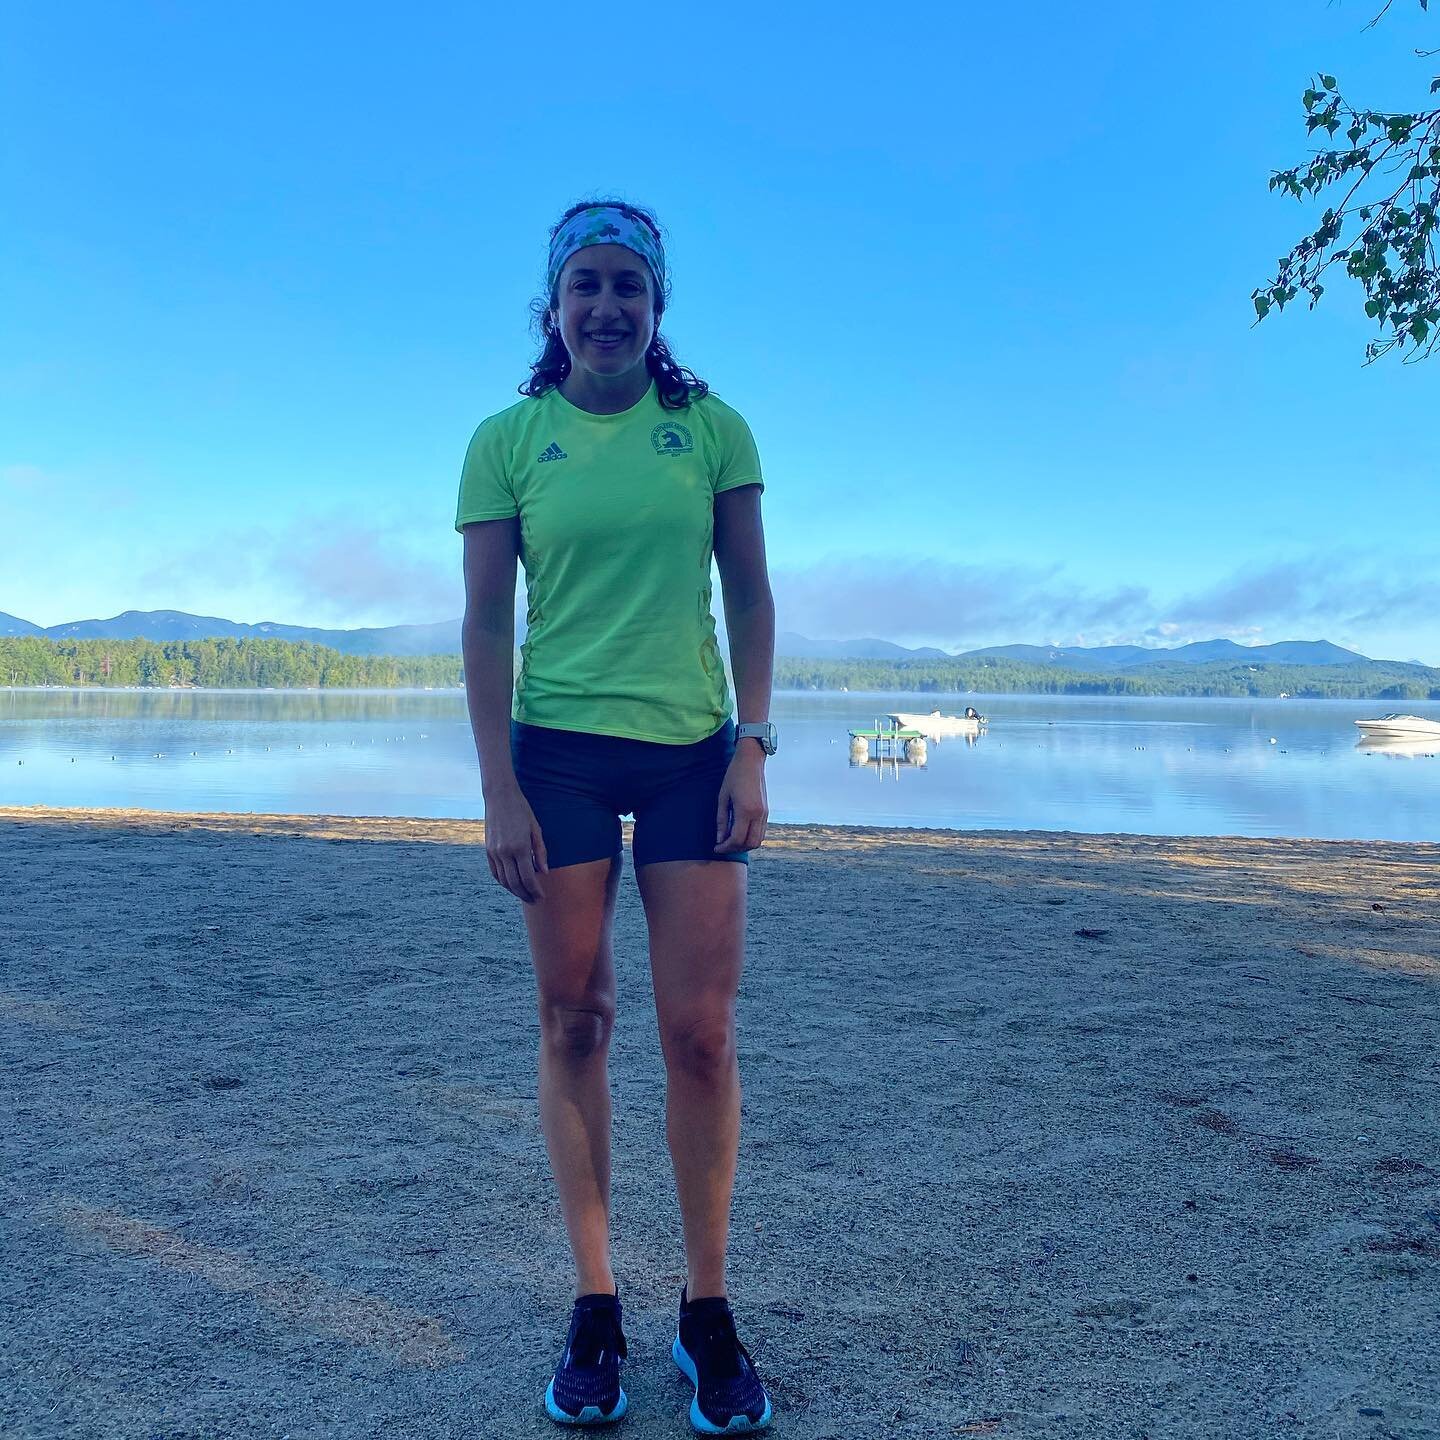 5 EZ miles this AM to end out the month of August. 188 for the month, which was less than planned, but still a solid month. The morning was beautiful! Cold, but beautiful. The steam coming off the water made it that much prettier.⁣
⁣
After being in s